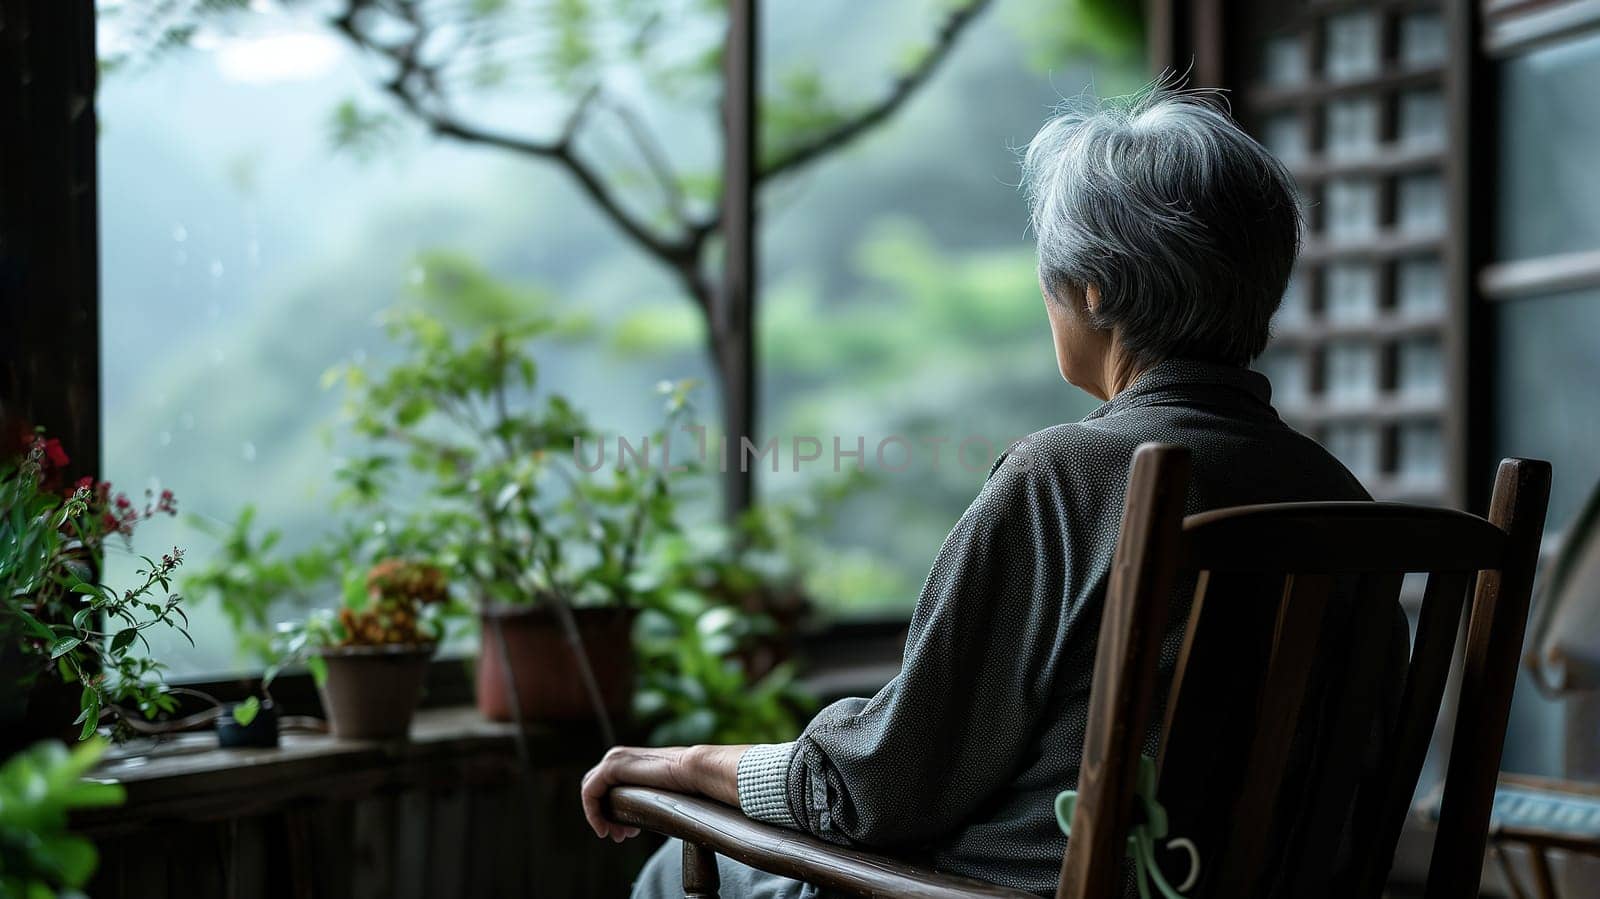 Memory Loss. Back View Lonely Old Asian Woman With Gray Hair Sits In Chair in Dark Room with Potted Flowers. Later life, Aging Crisis Or Alzheimer Disease Concept. AI Generated. Horizontal Plane.